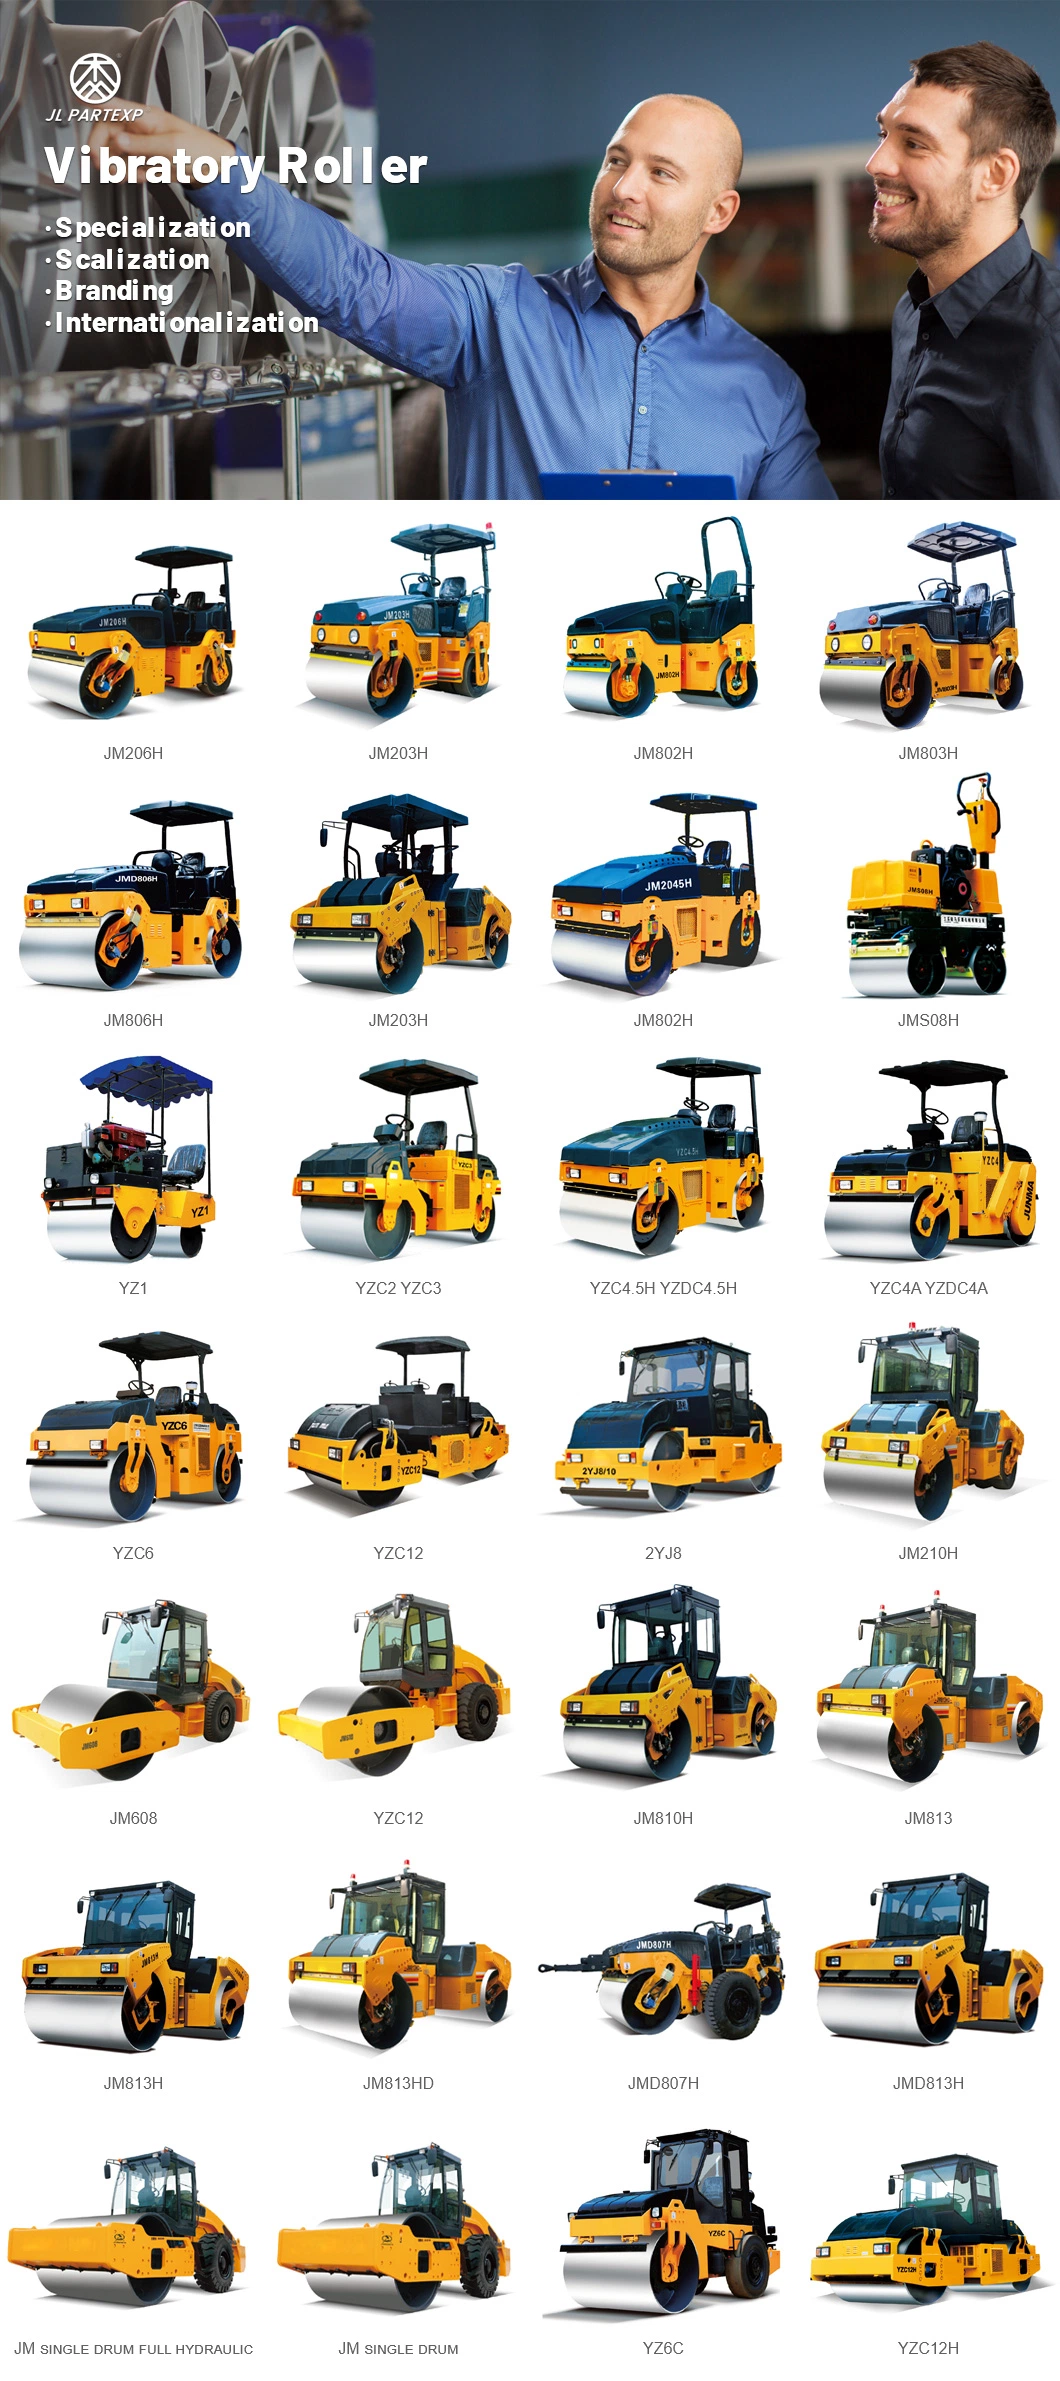 8ton Road Roller Construction Machine Mini Road Roller Compactor Rollers for Sale